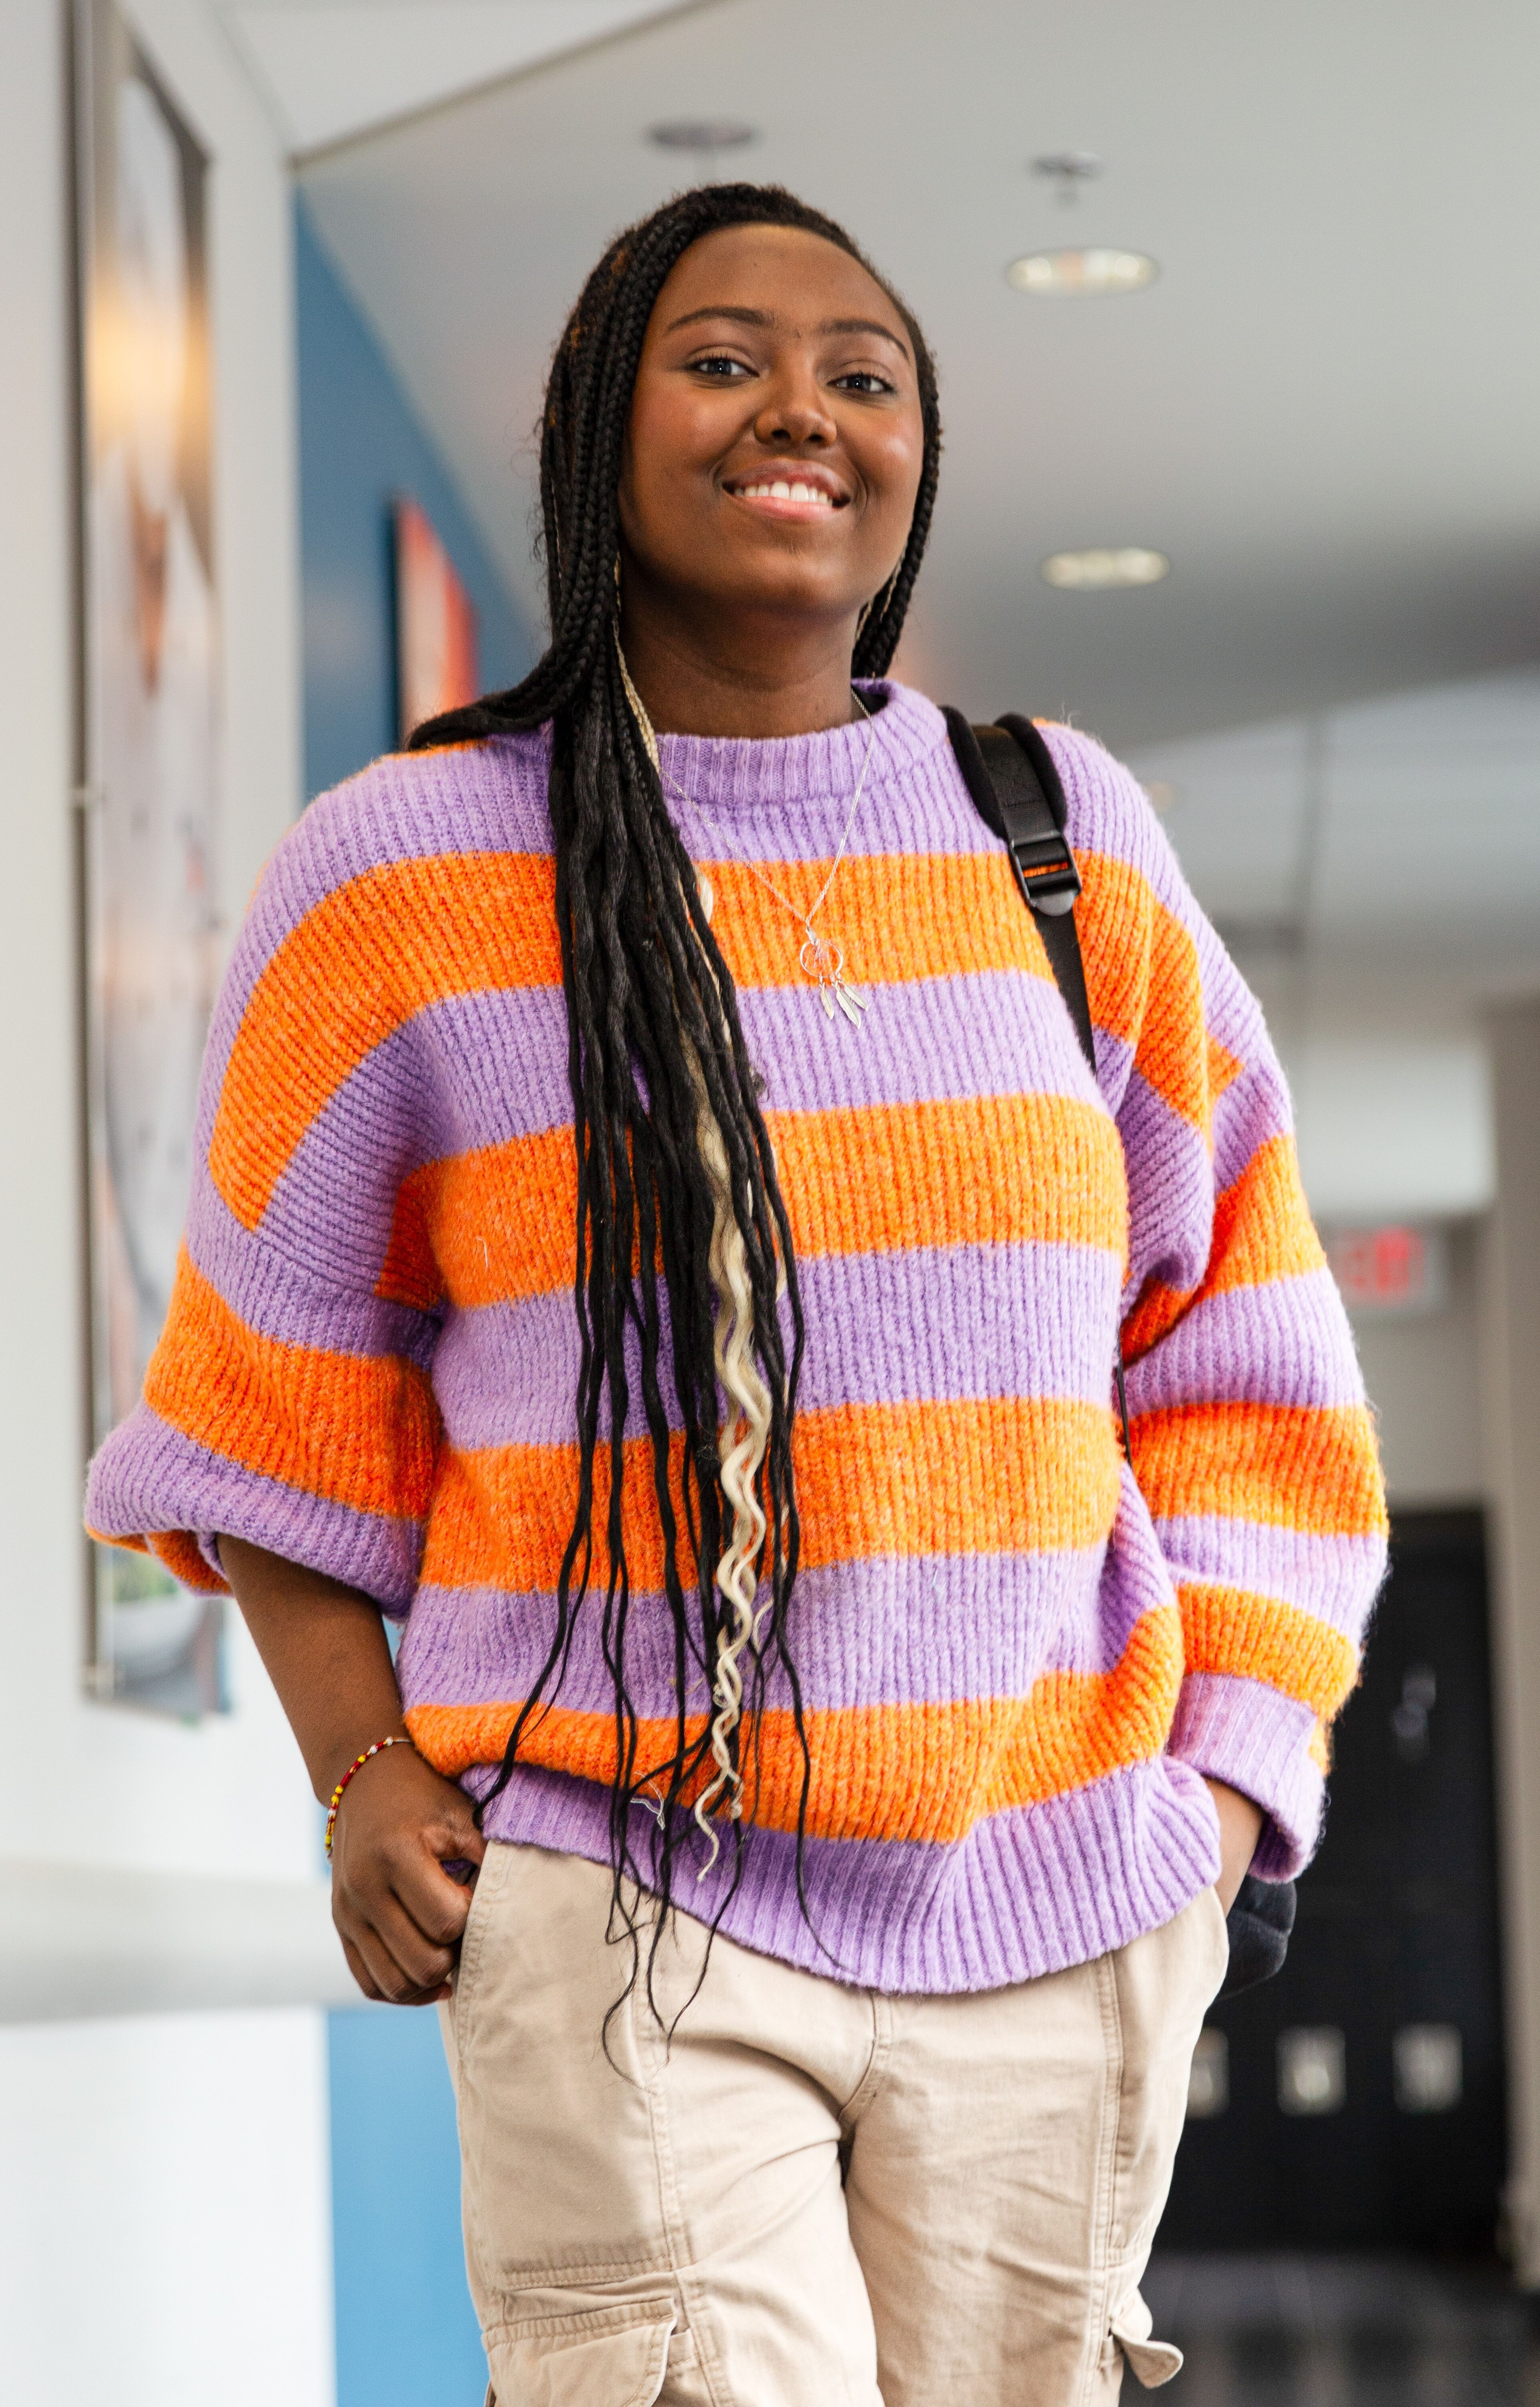 A young student in a colorful sweater radiates positivity in the campus hallway.